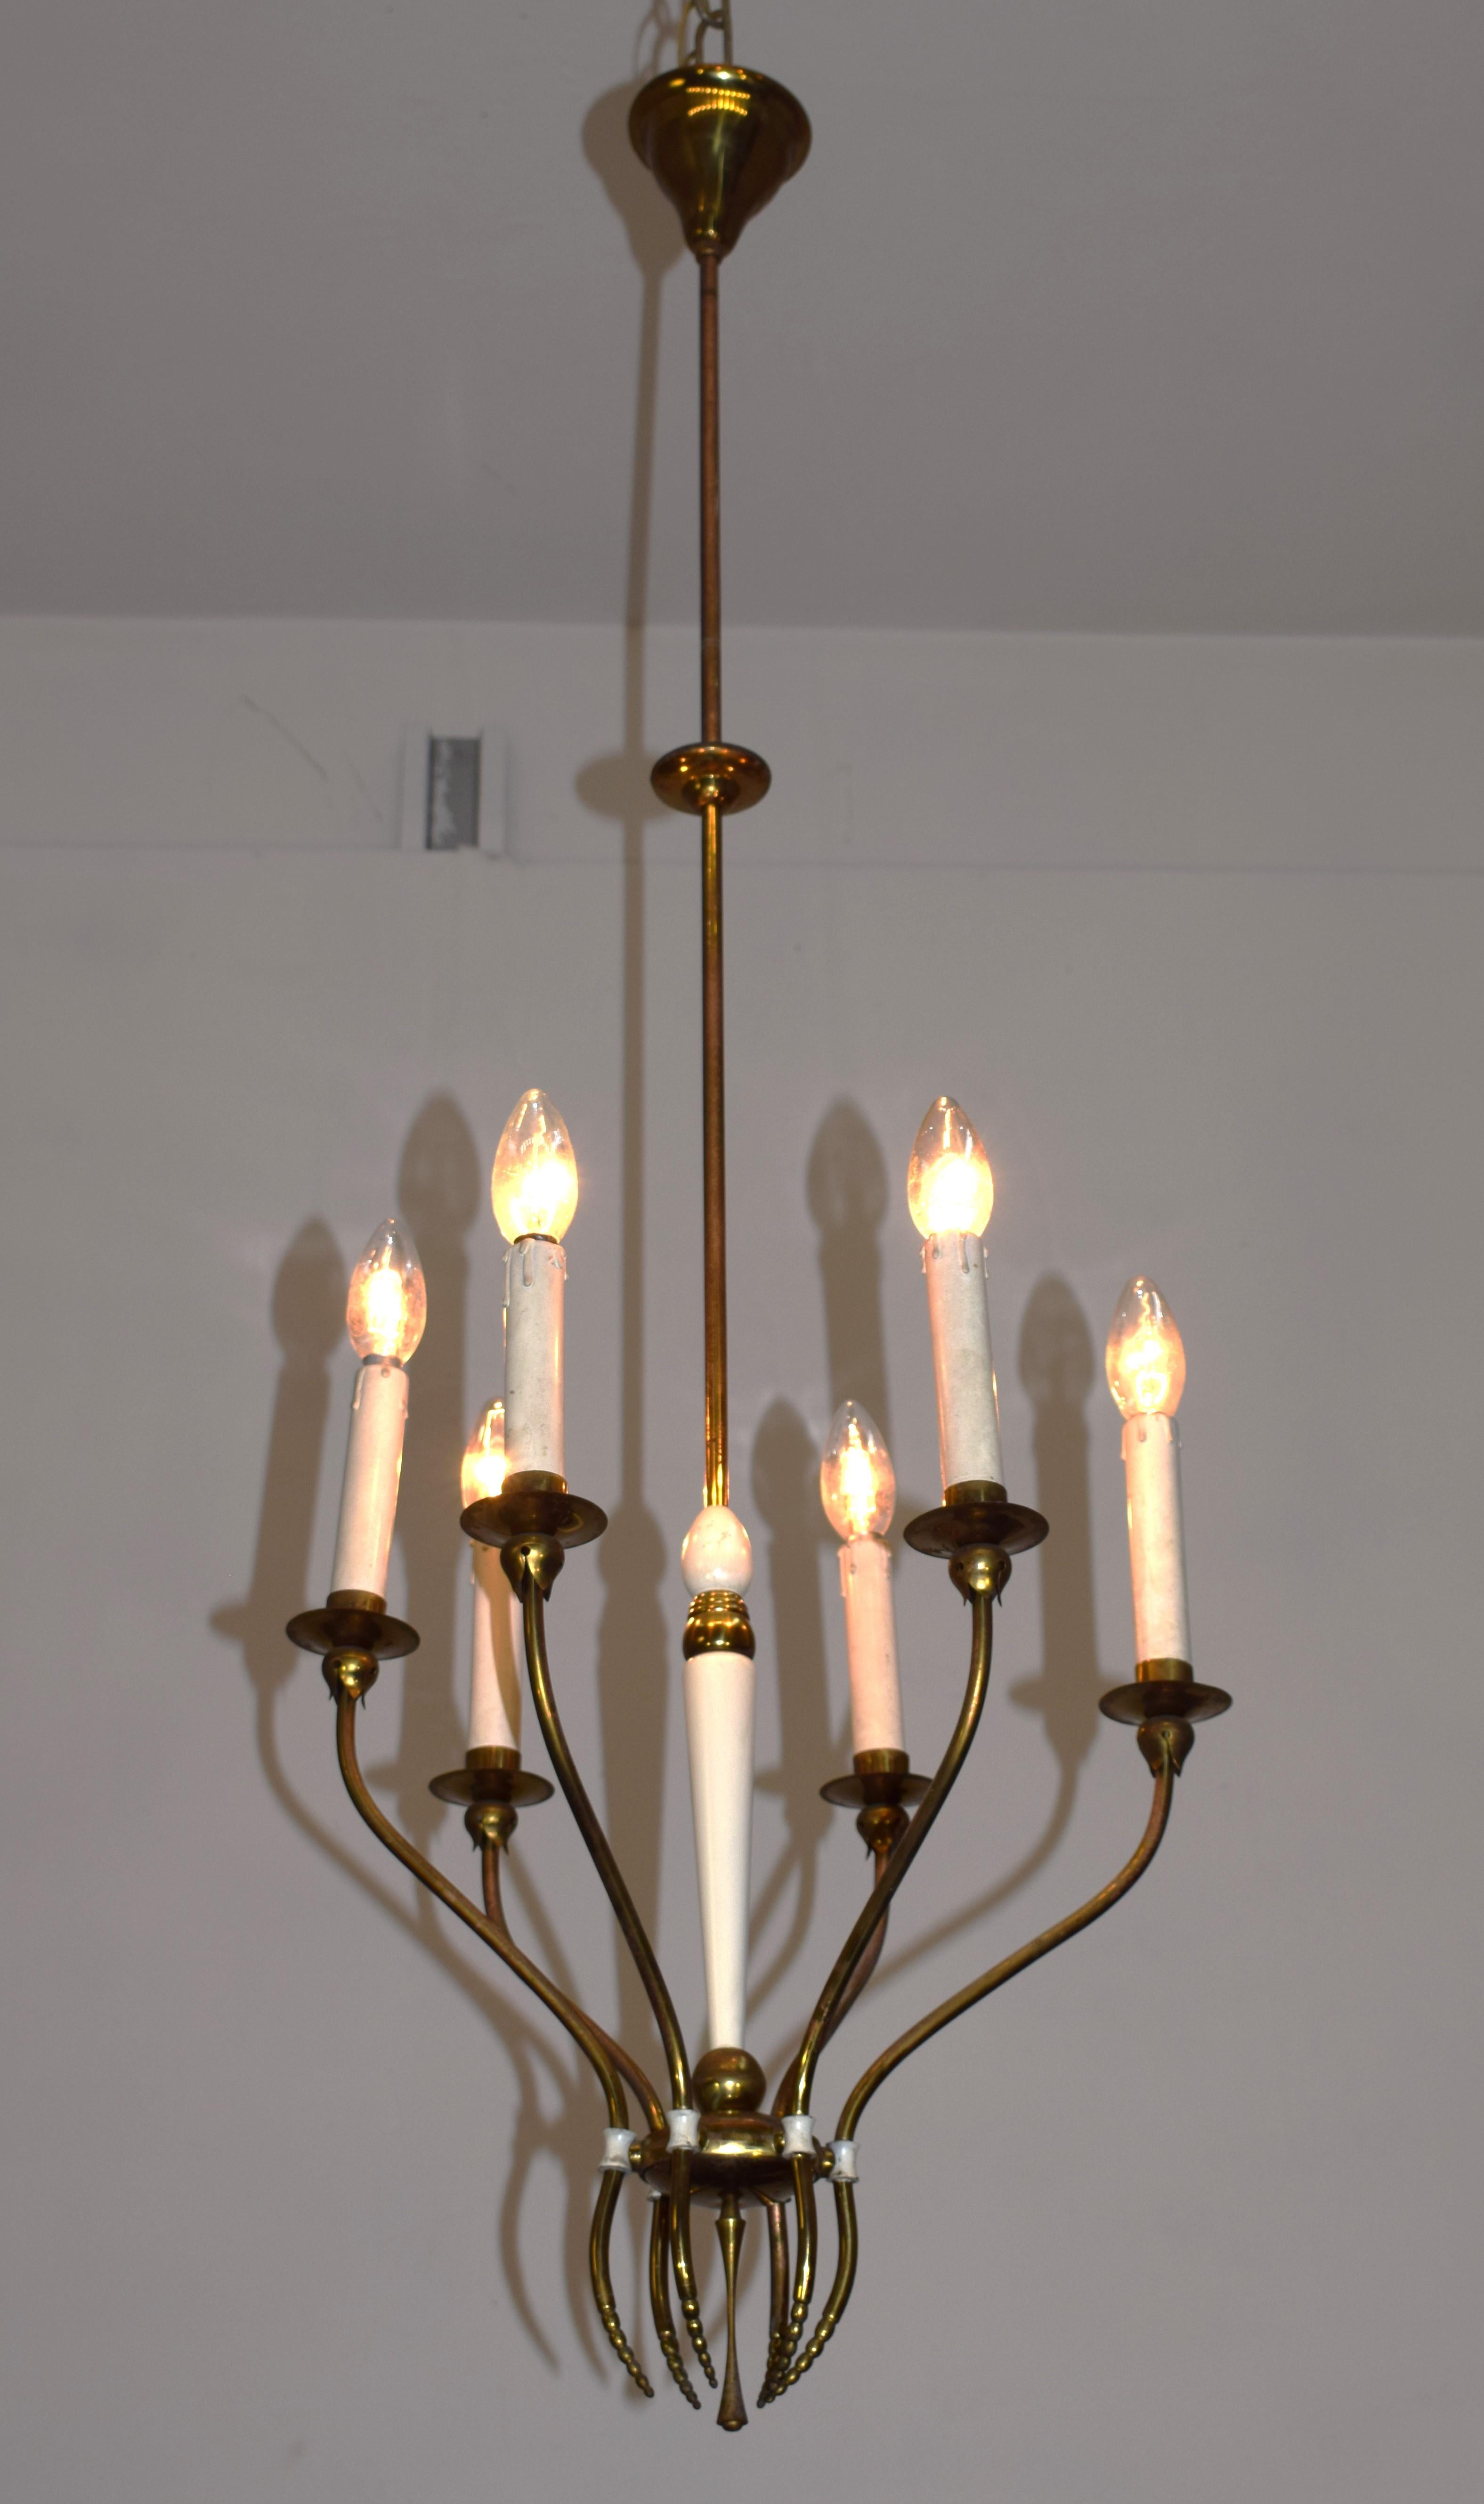 Italian chandelier, six lights, brass, metal and wood, 1950s.
Dimensions: H= 122 cm; D= 42 cm.